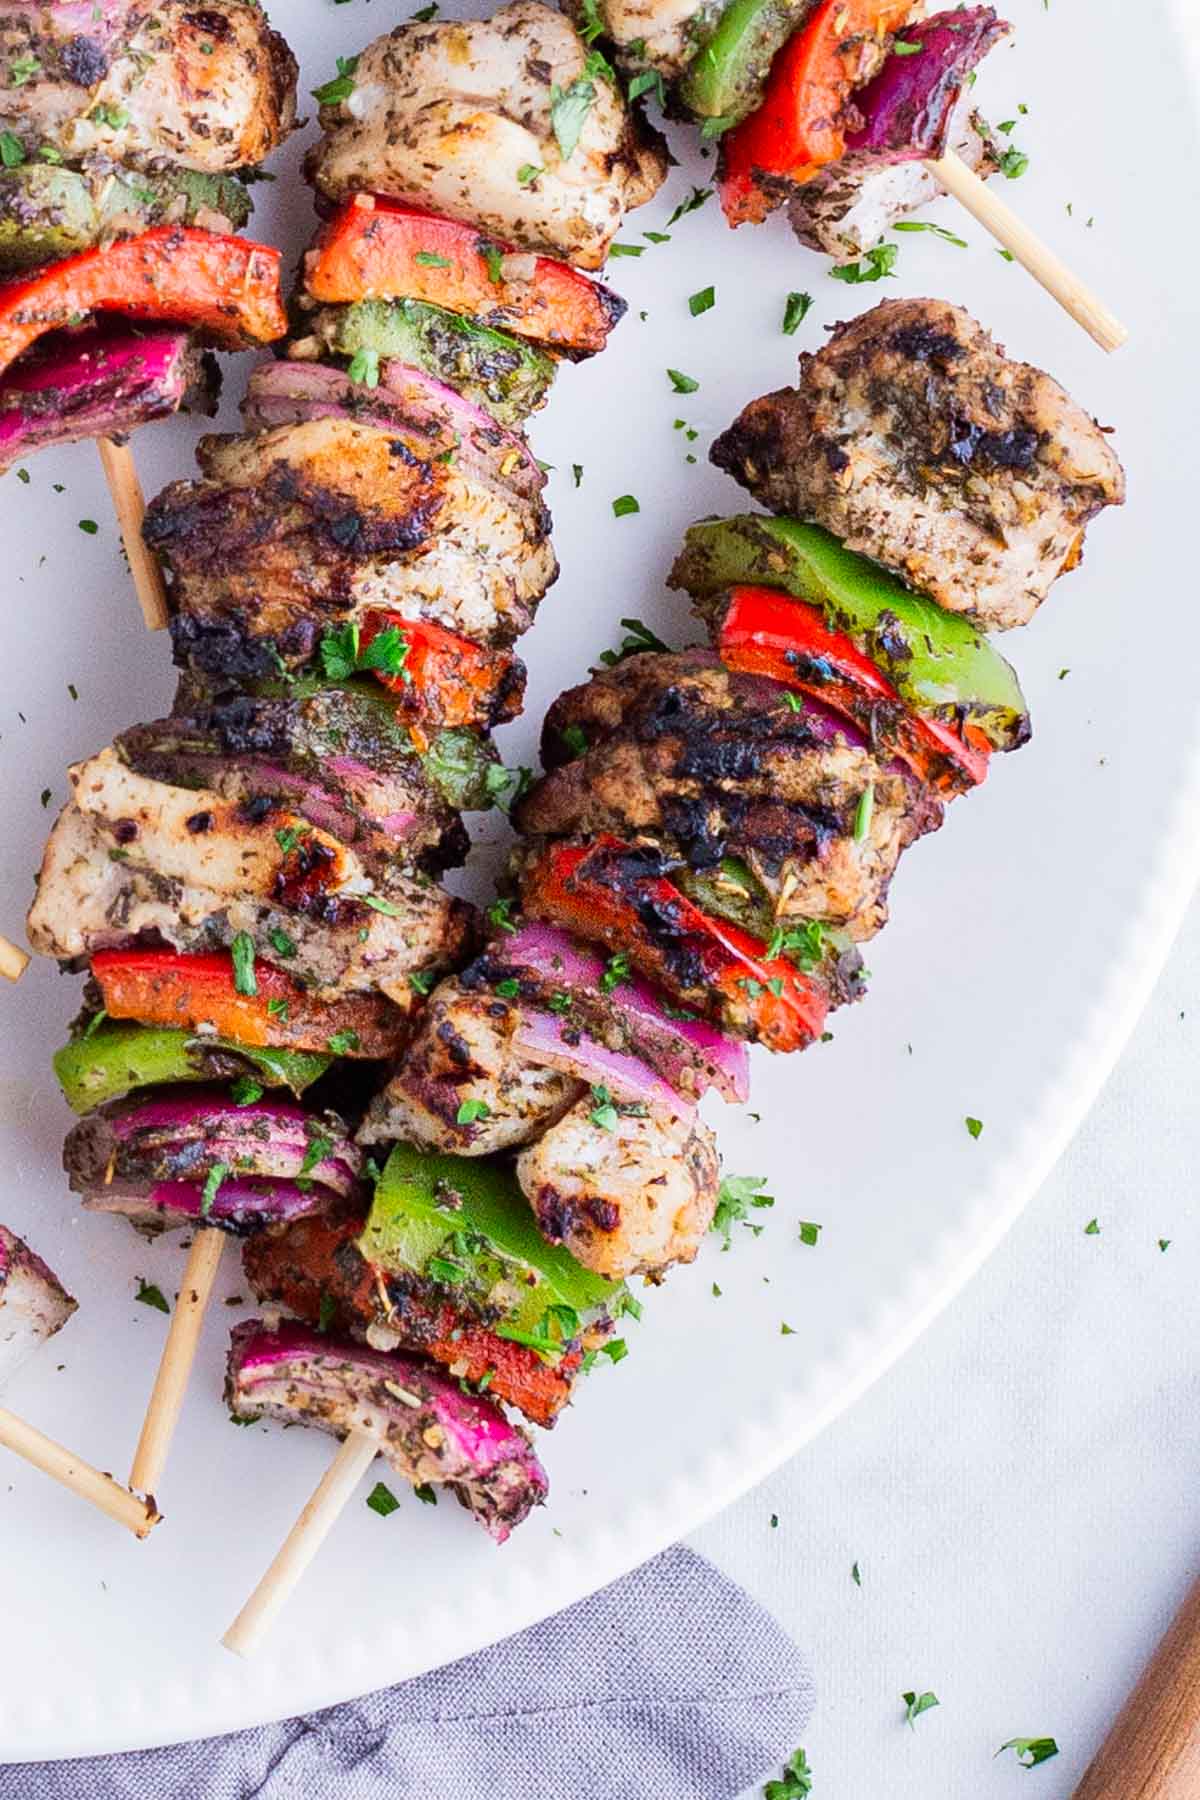 Greek seasoned chicken are grilled with sliced vegetables on a skewer.